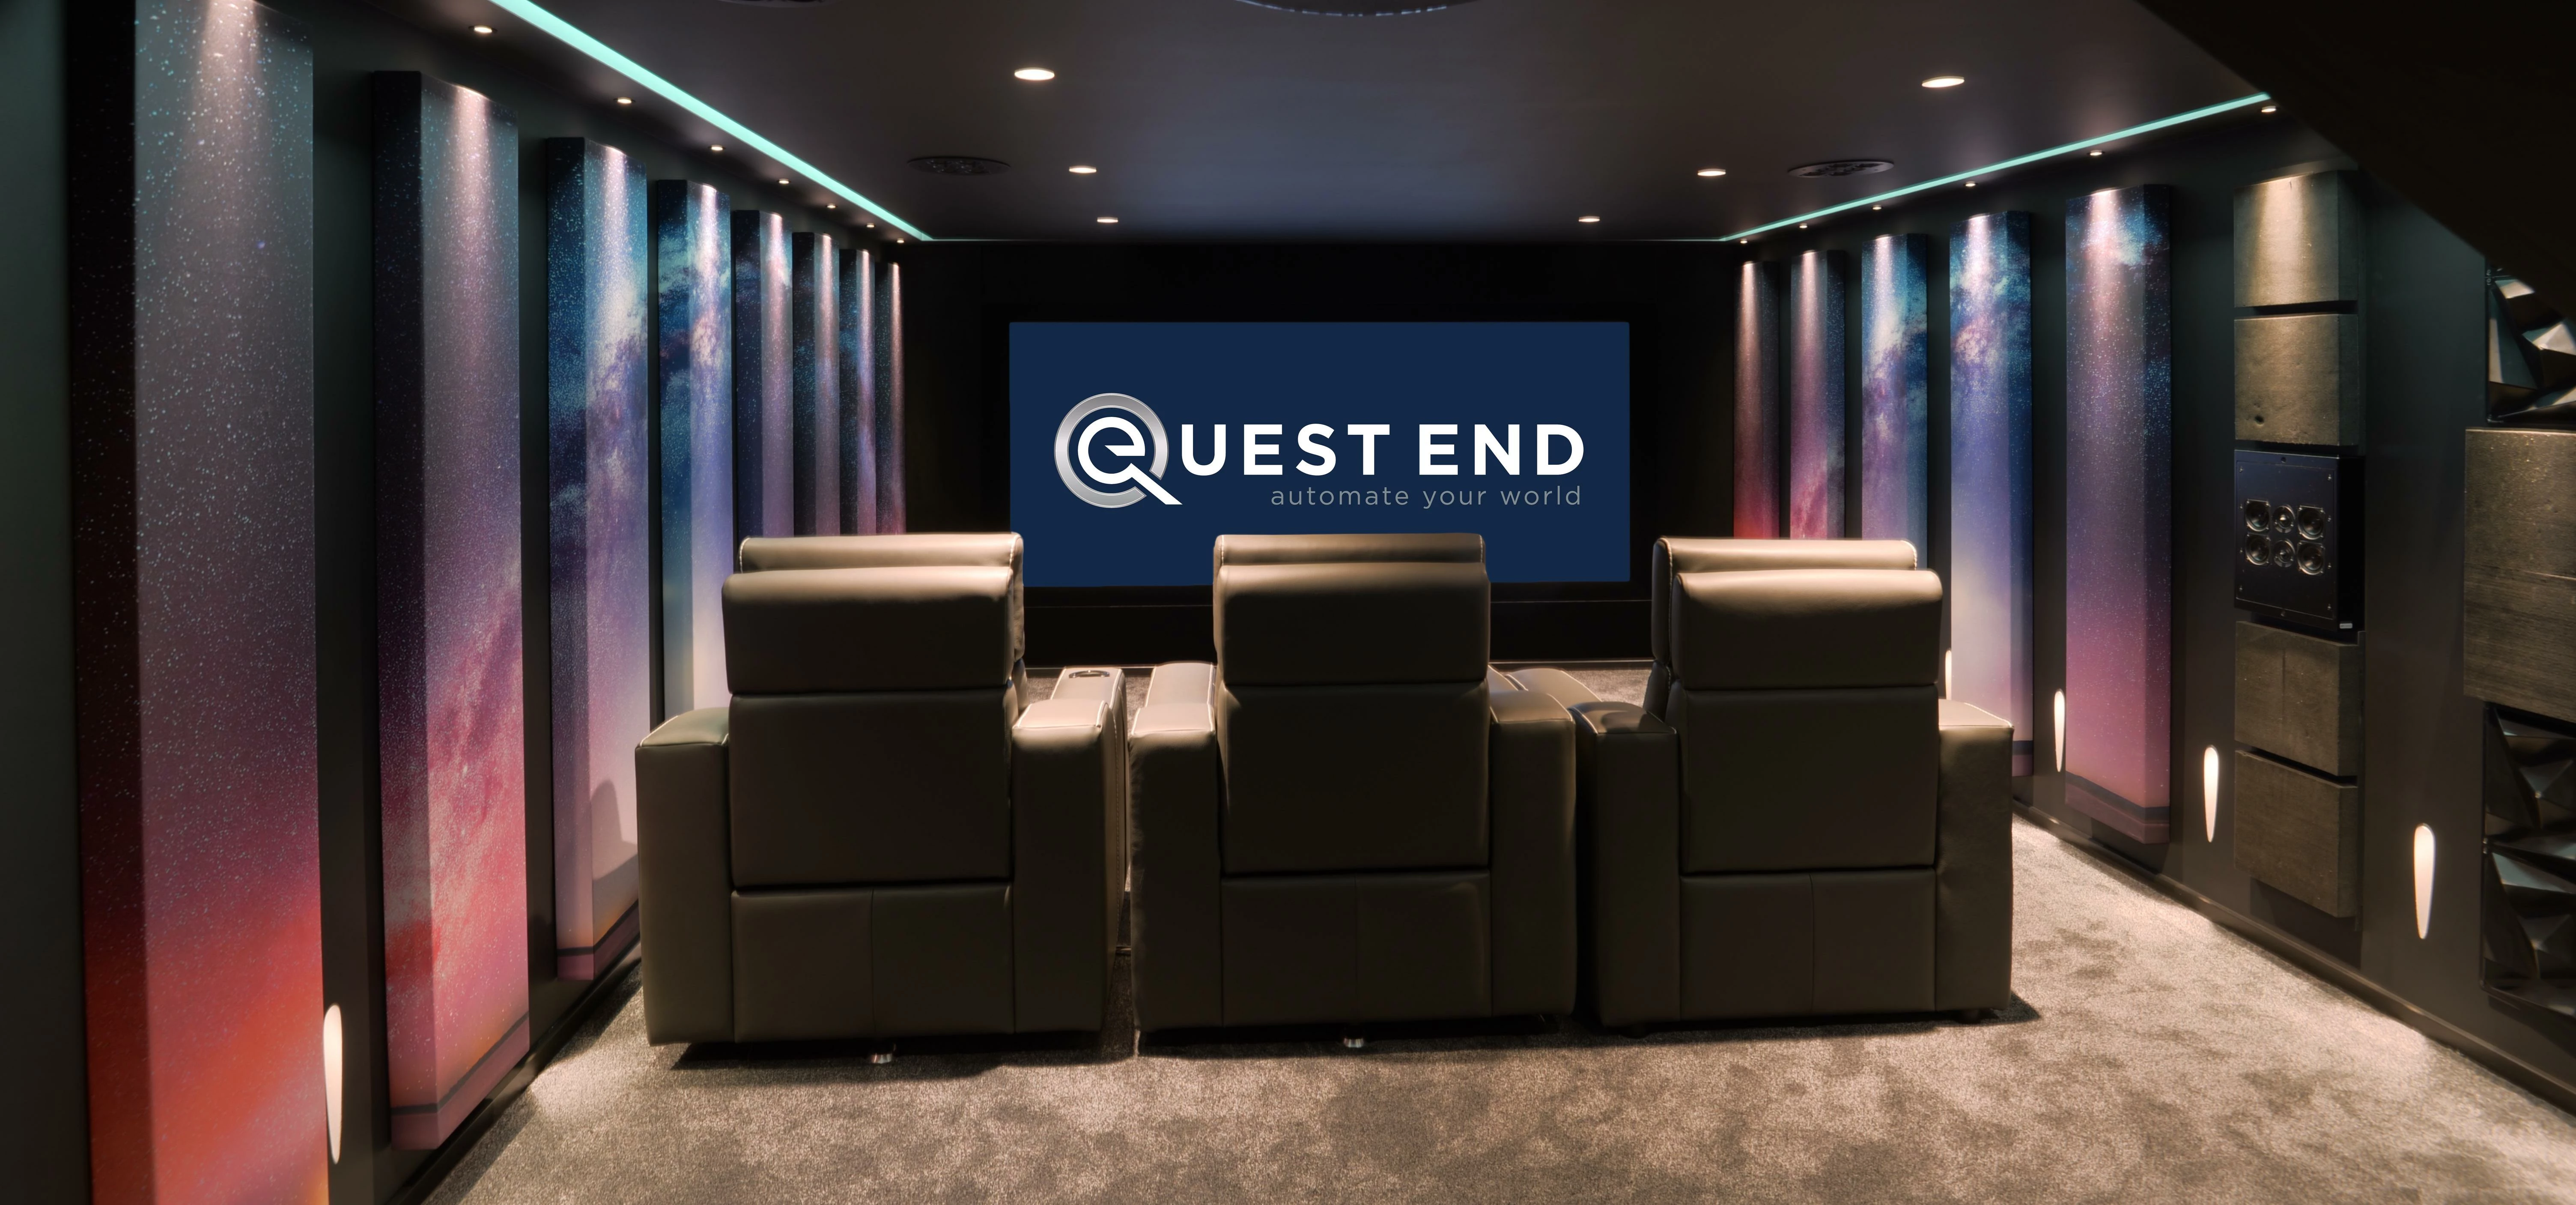 The Cinema-at-Home suite at Quest End's Experience Centre